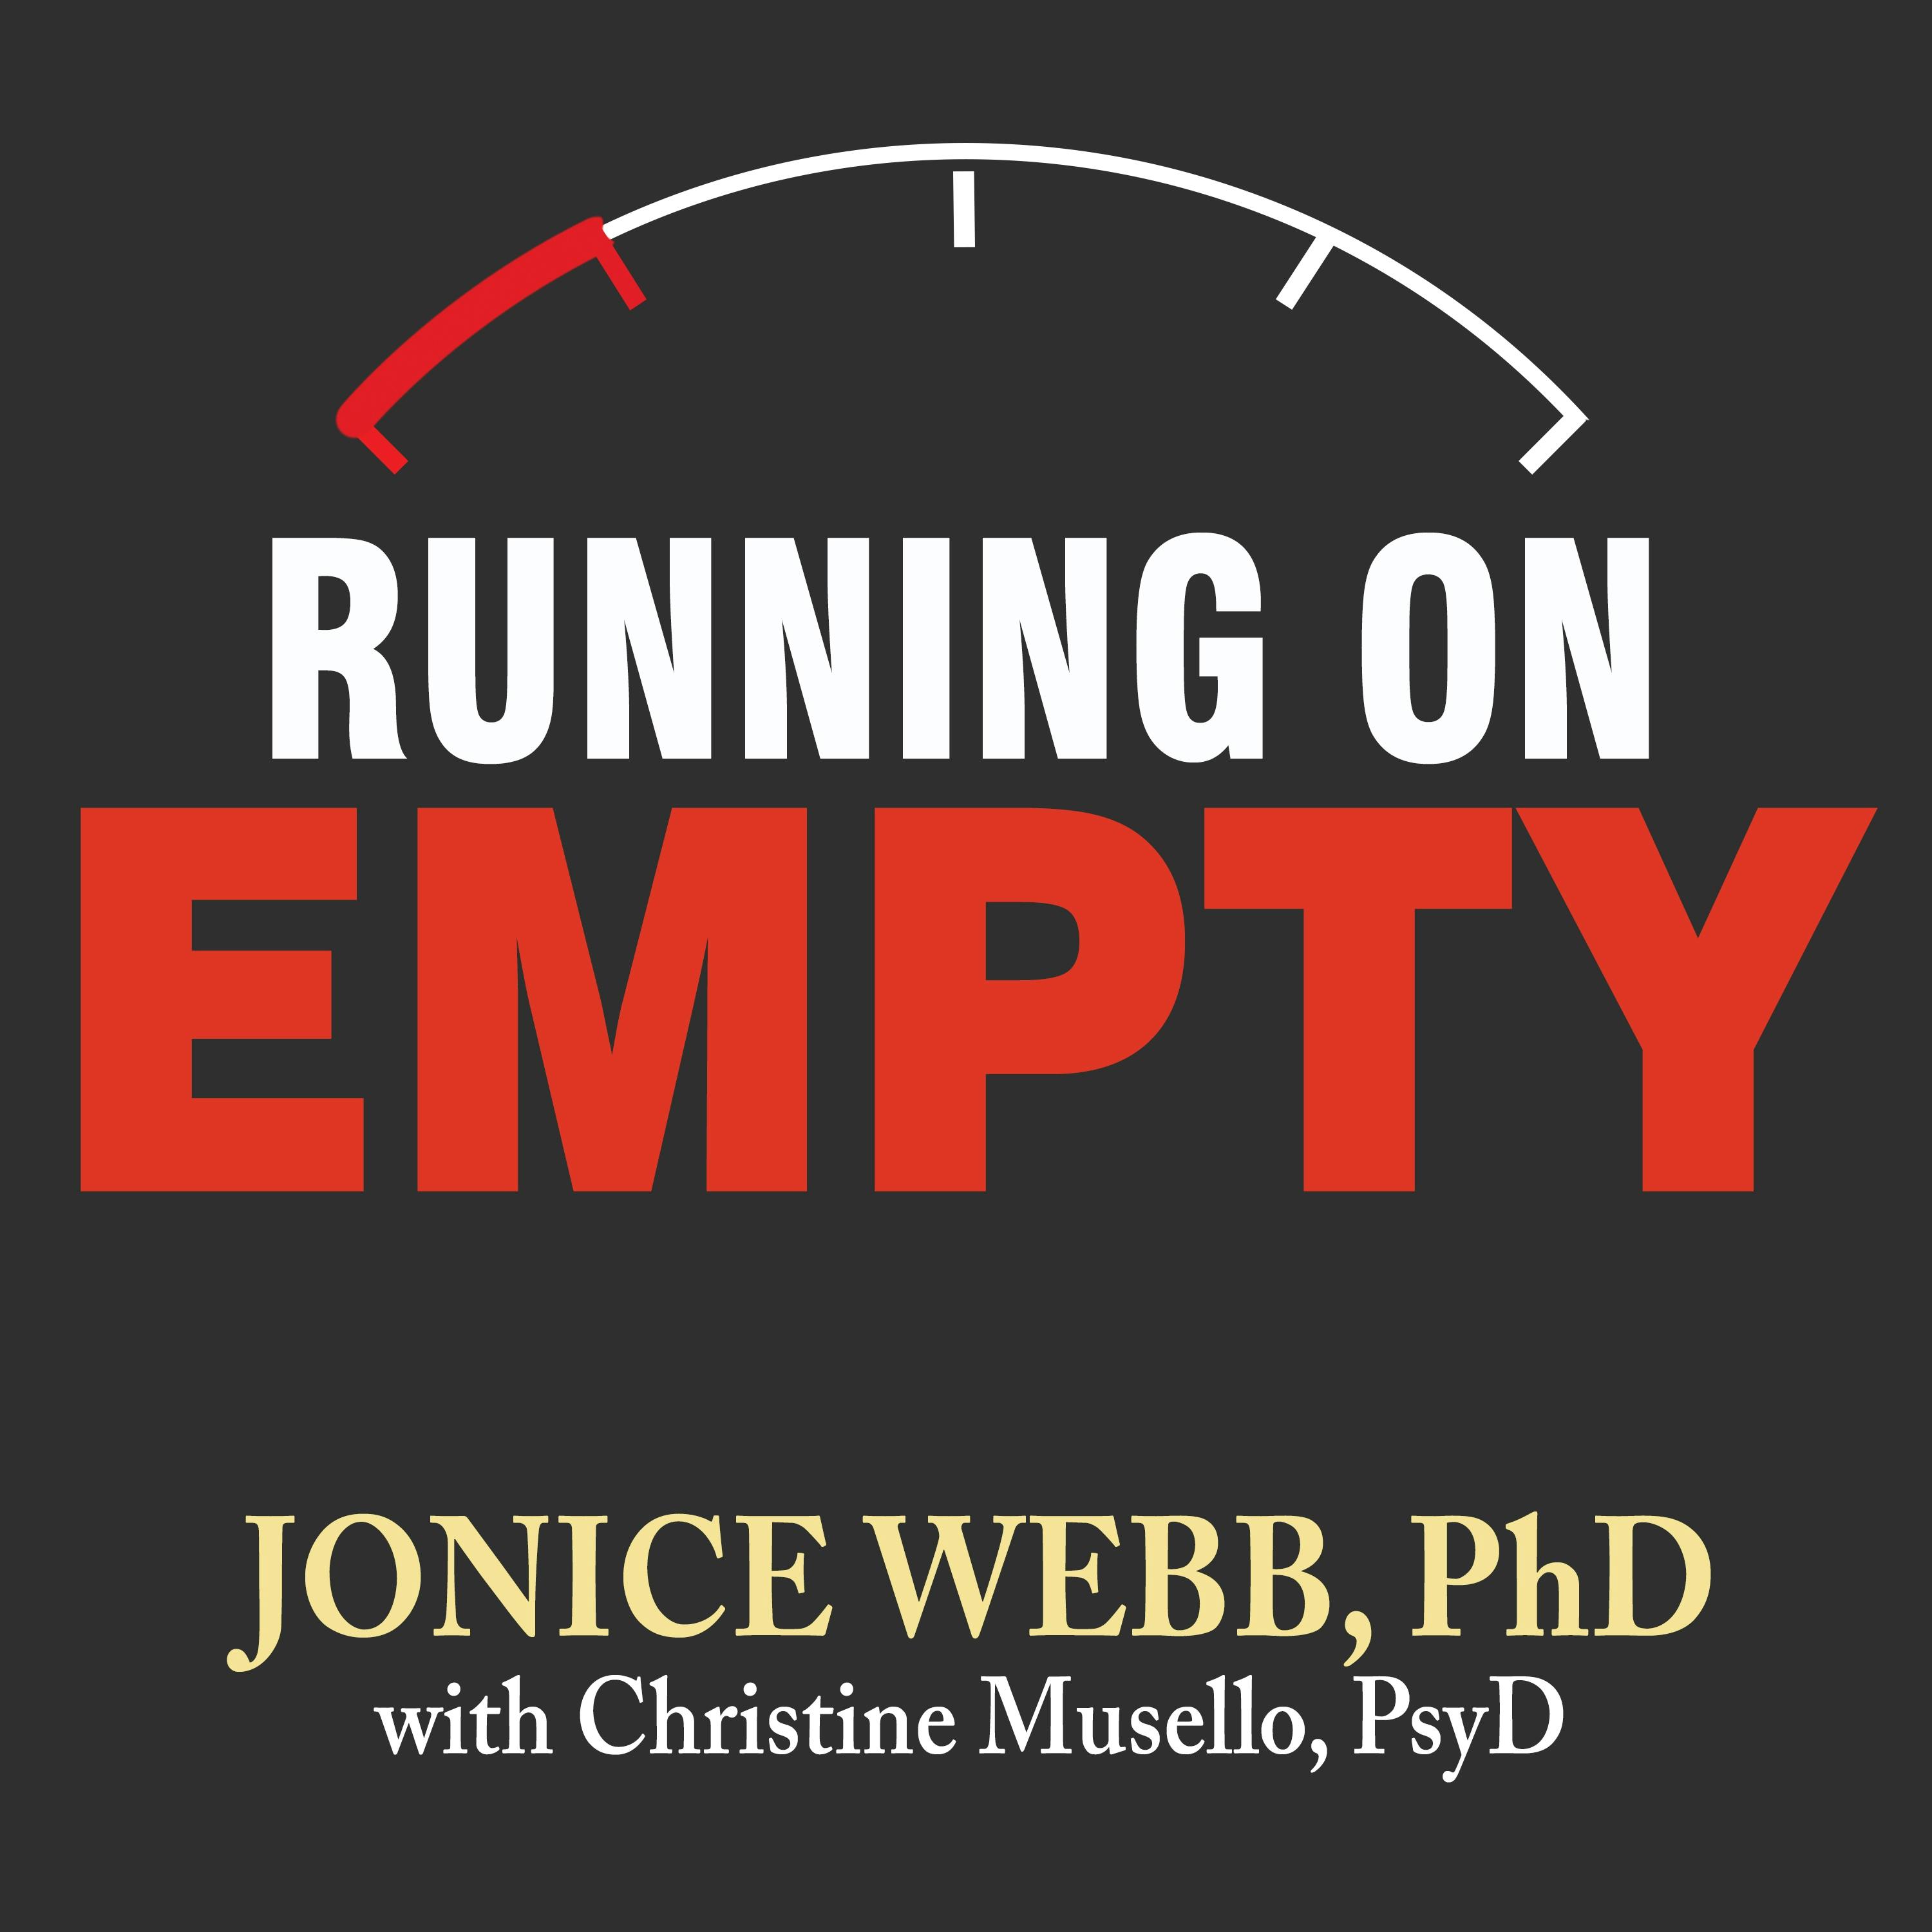 Running On Empty: Overcome Your Childhood Emotional Neglect - Jonice Webb, Ph.D., Christine Musello, PsyD